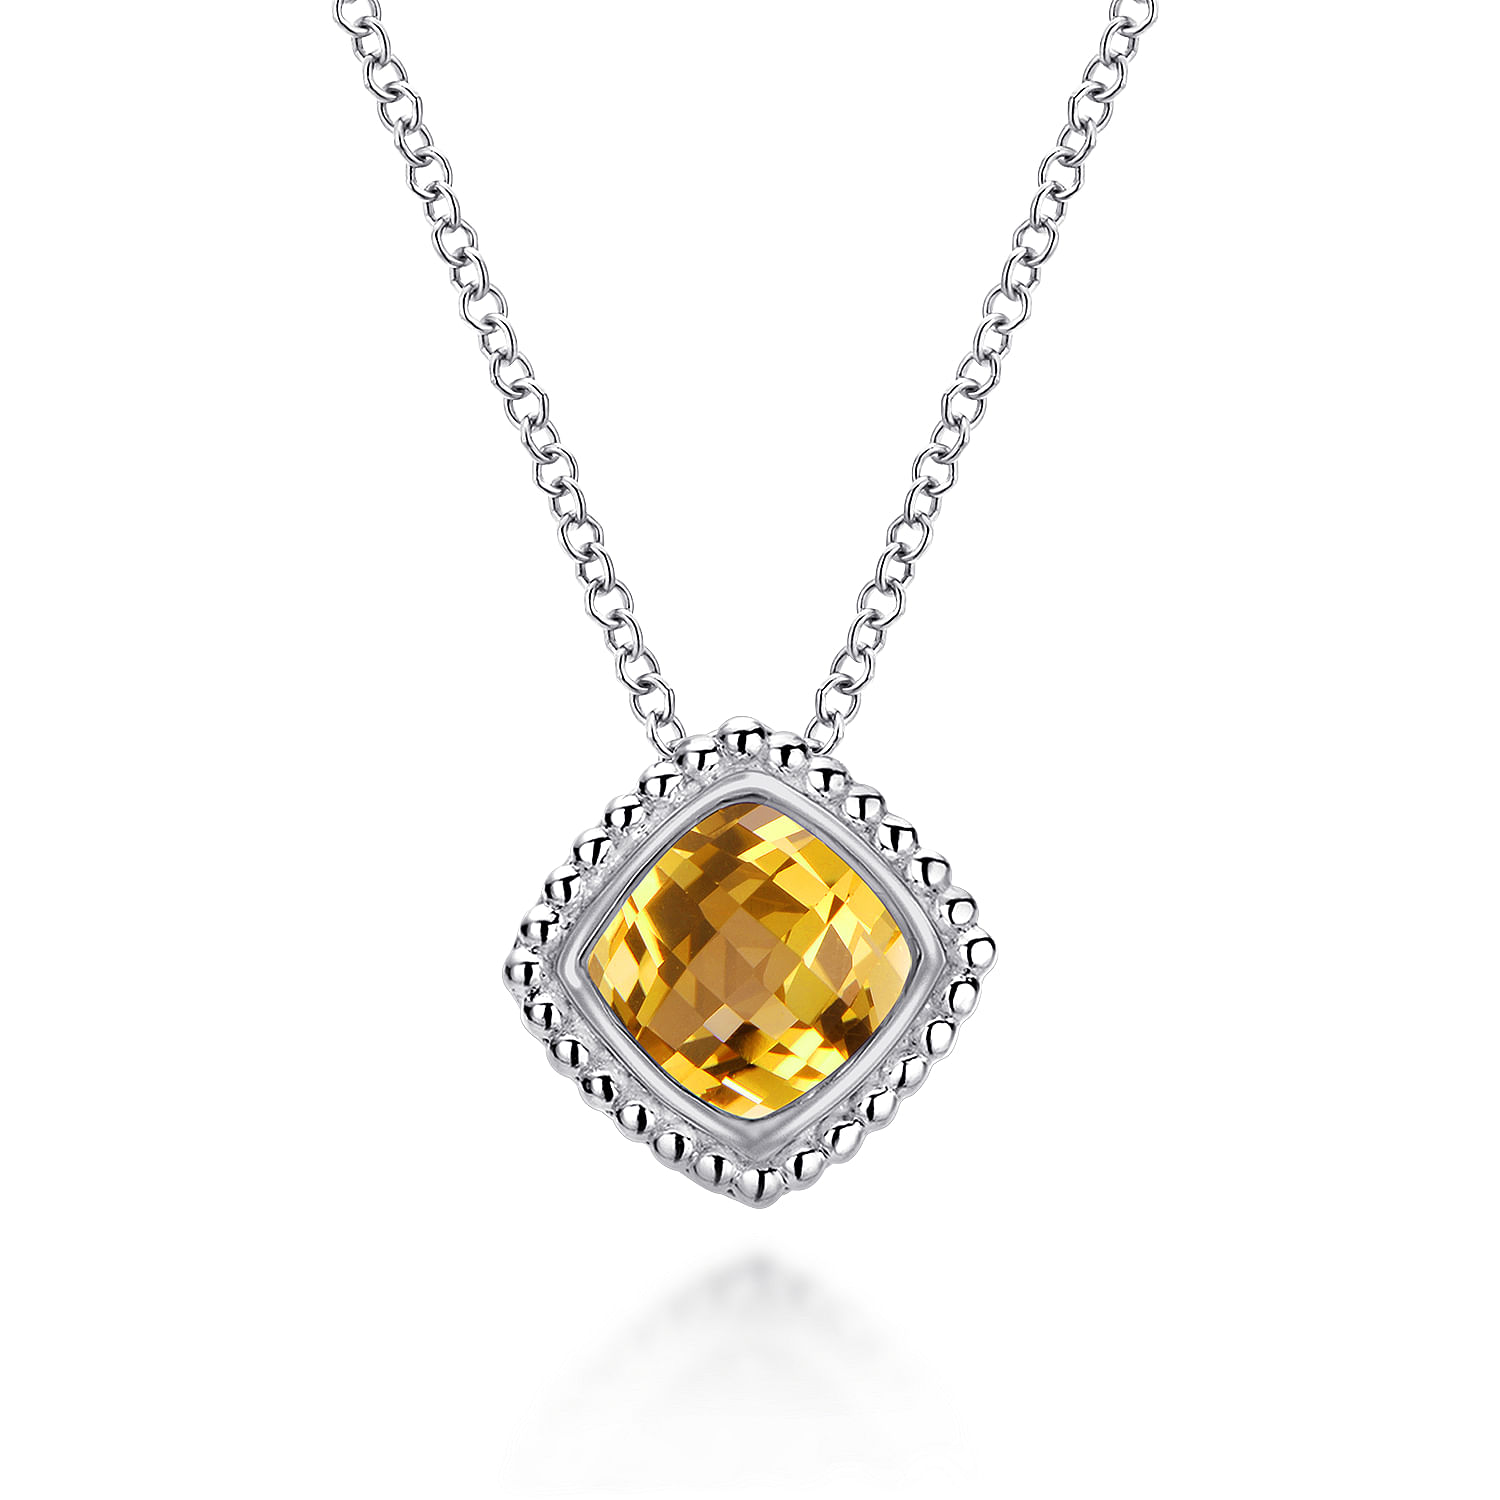 18 inch 925 Sterling Silver Cushion Cut Citrine Pendant Necklace